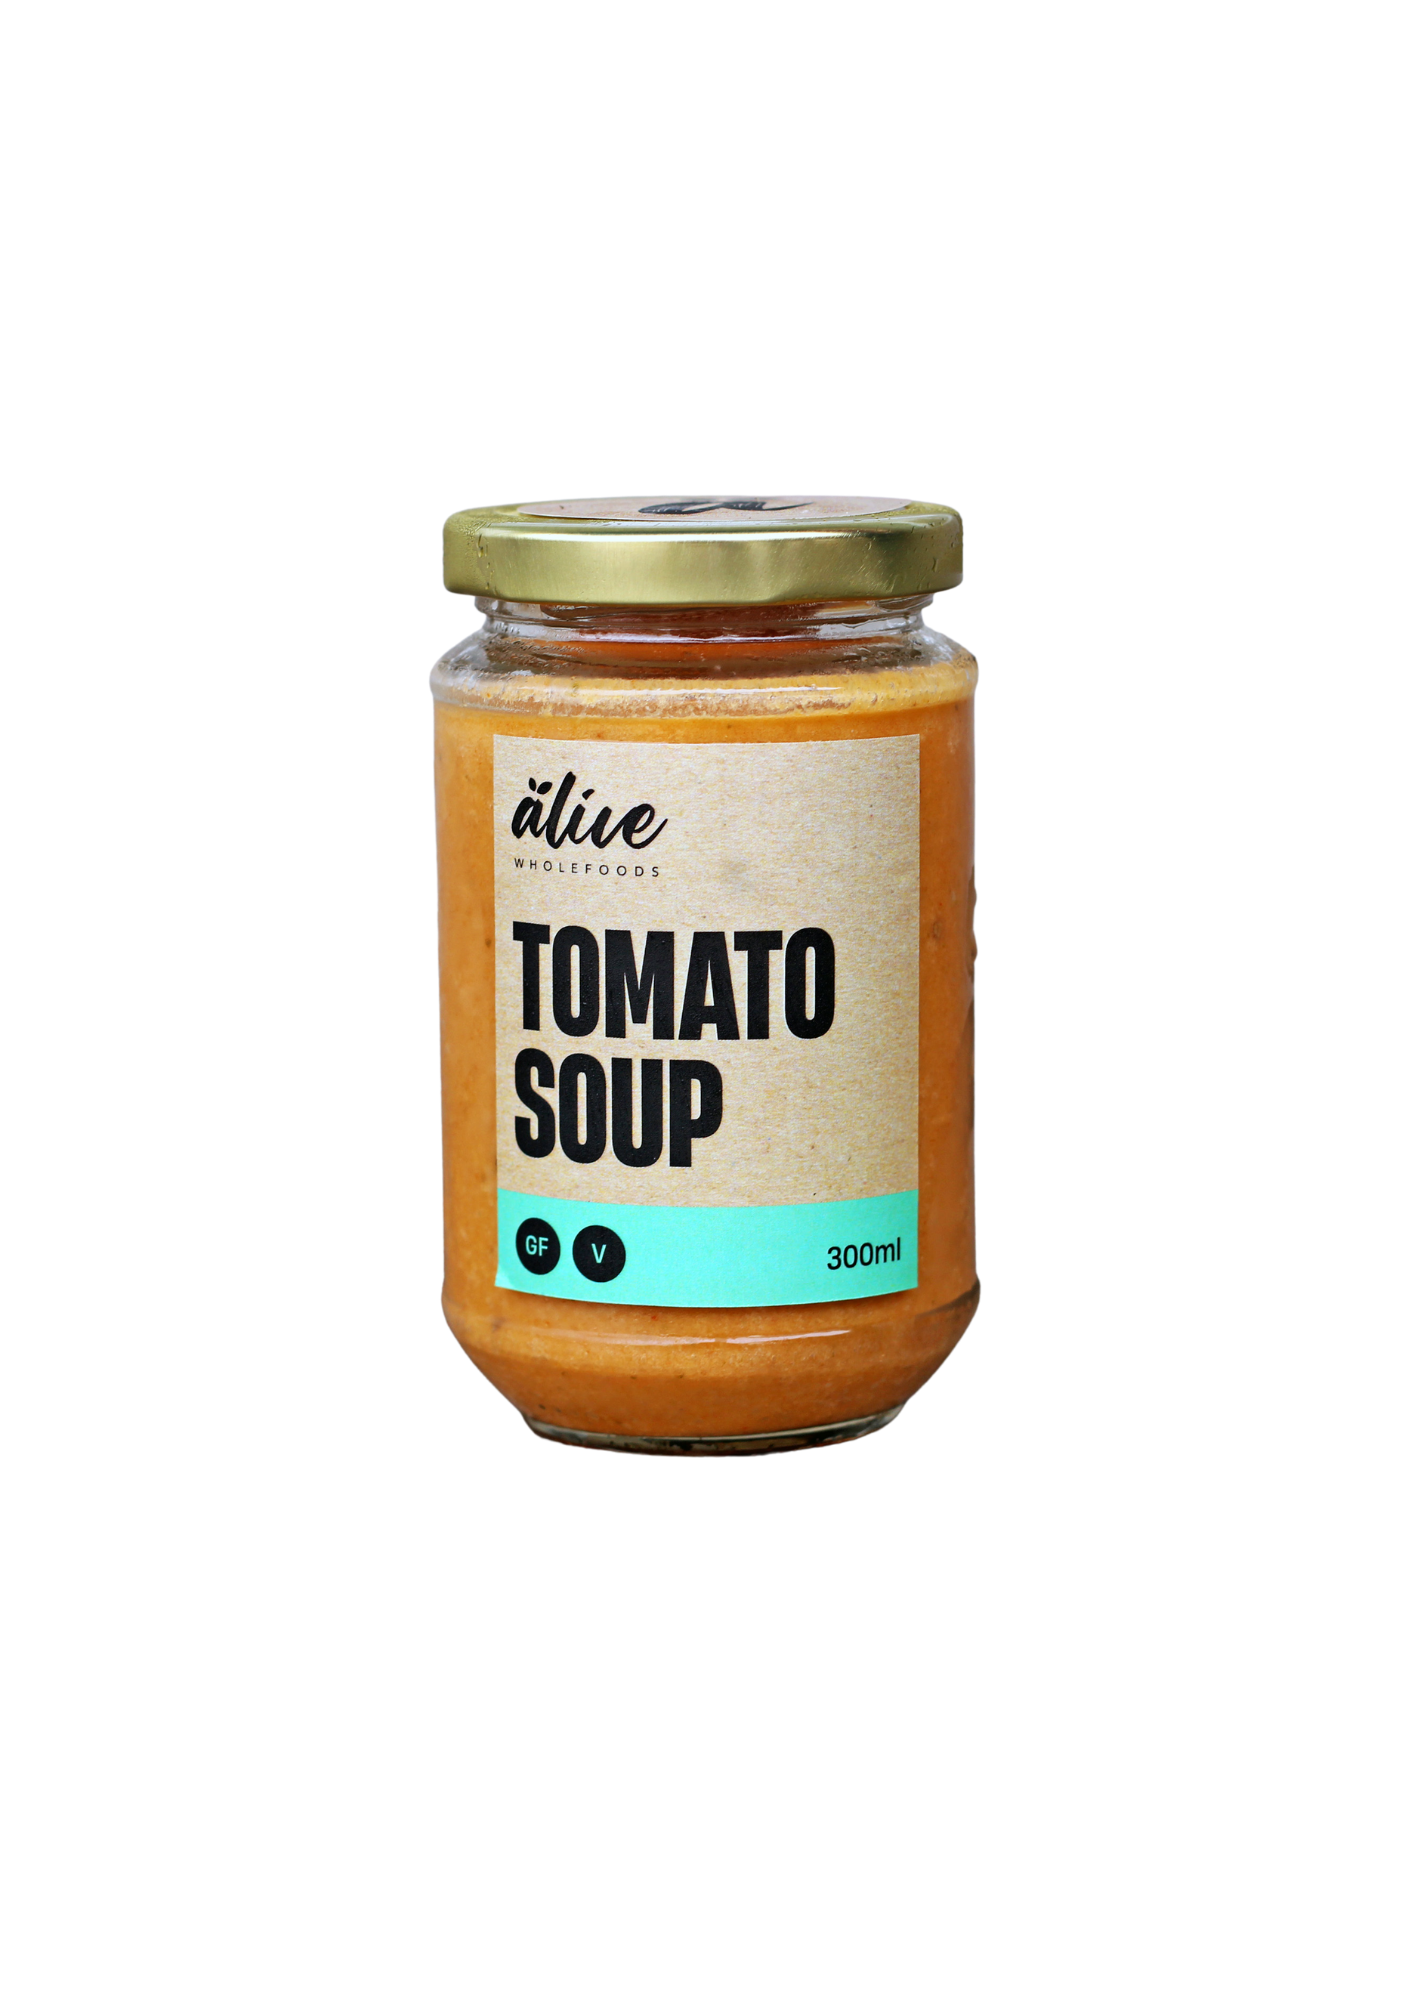 https://www.alivewholefoods.com/wp-content/uploads/2022/03/Tomato-soup-copy.png